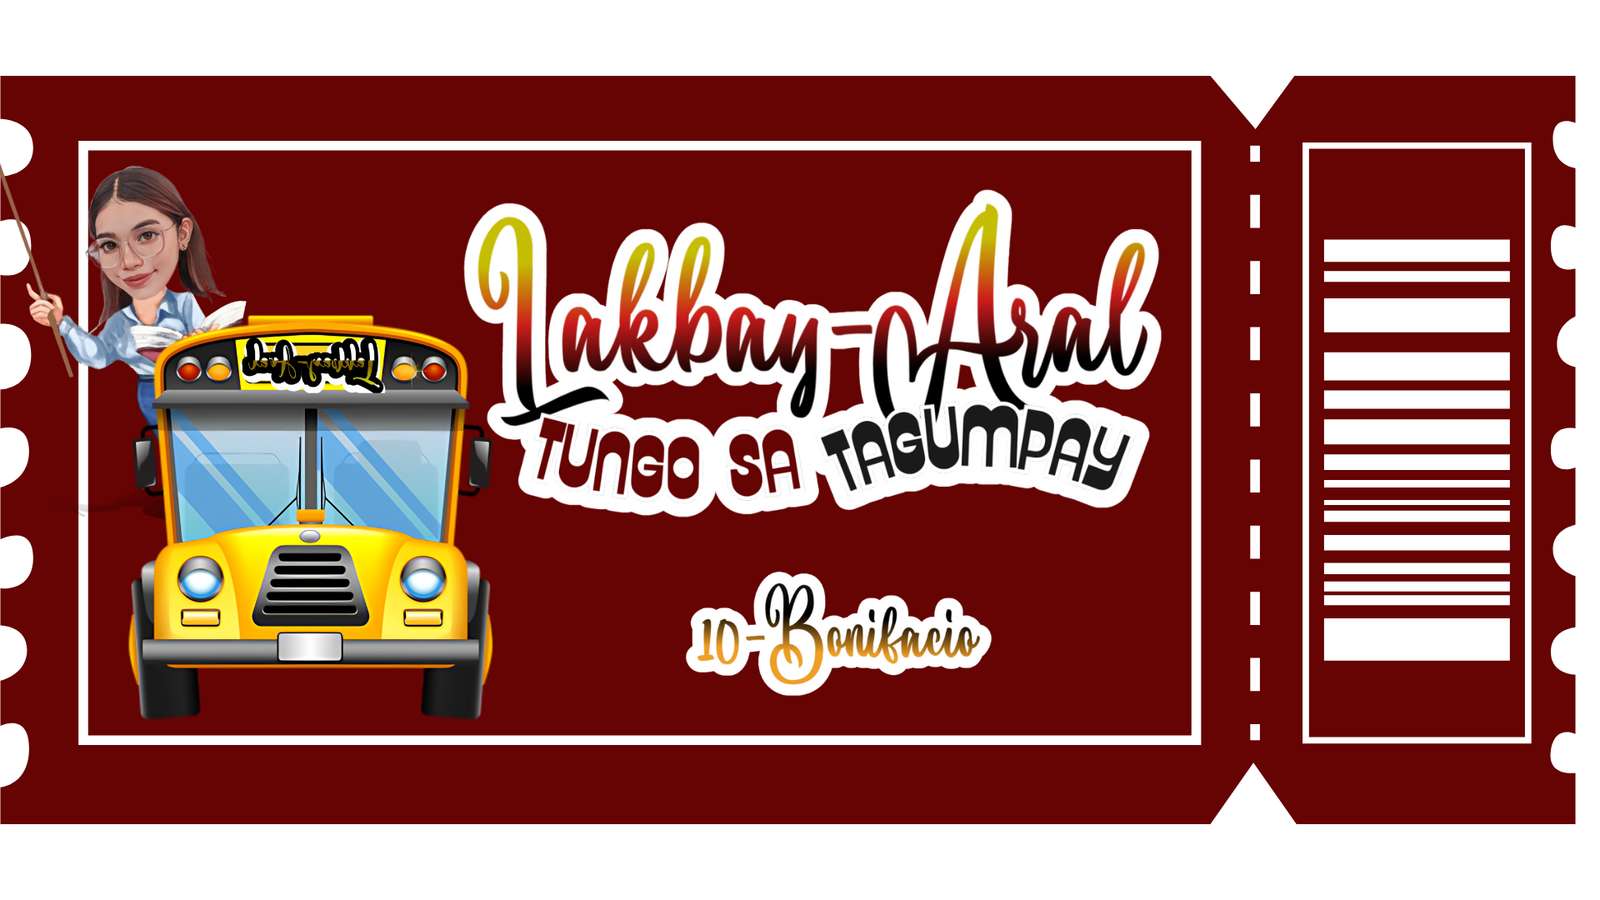 LAKBAY-ARAL puzzle online from photo